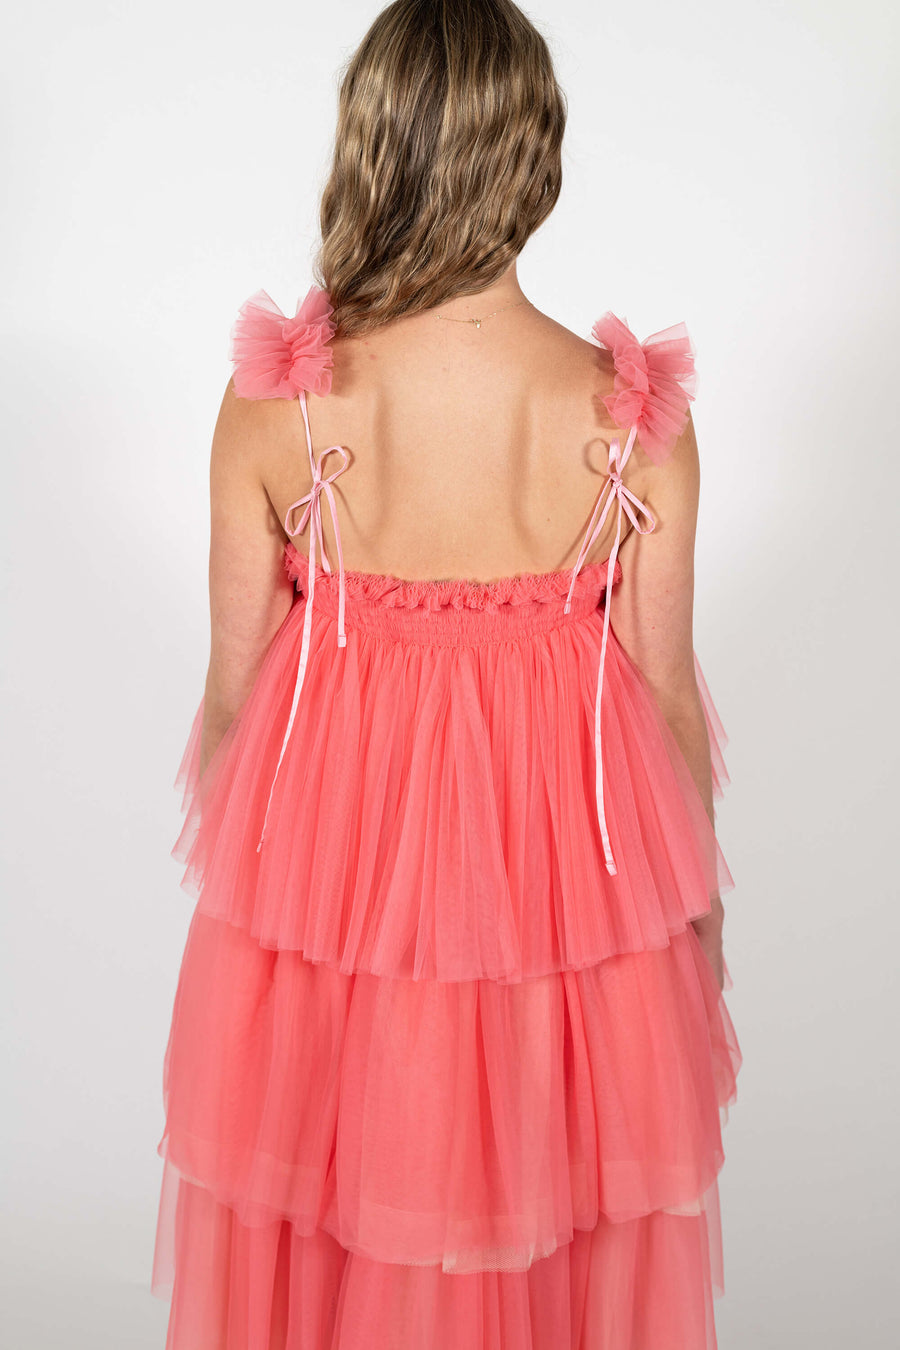 Close up back details of the tulle shoulder straps with bow ties on the Mariposa Tulle Midi Dress by House of Campbell.